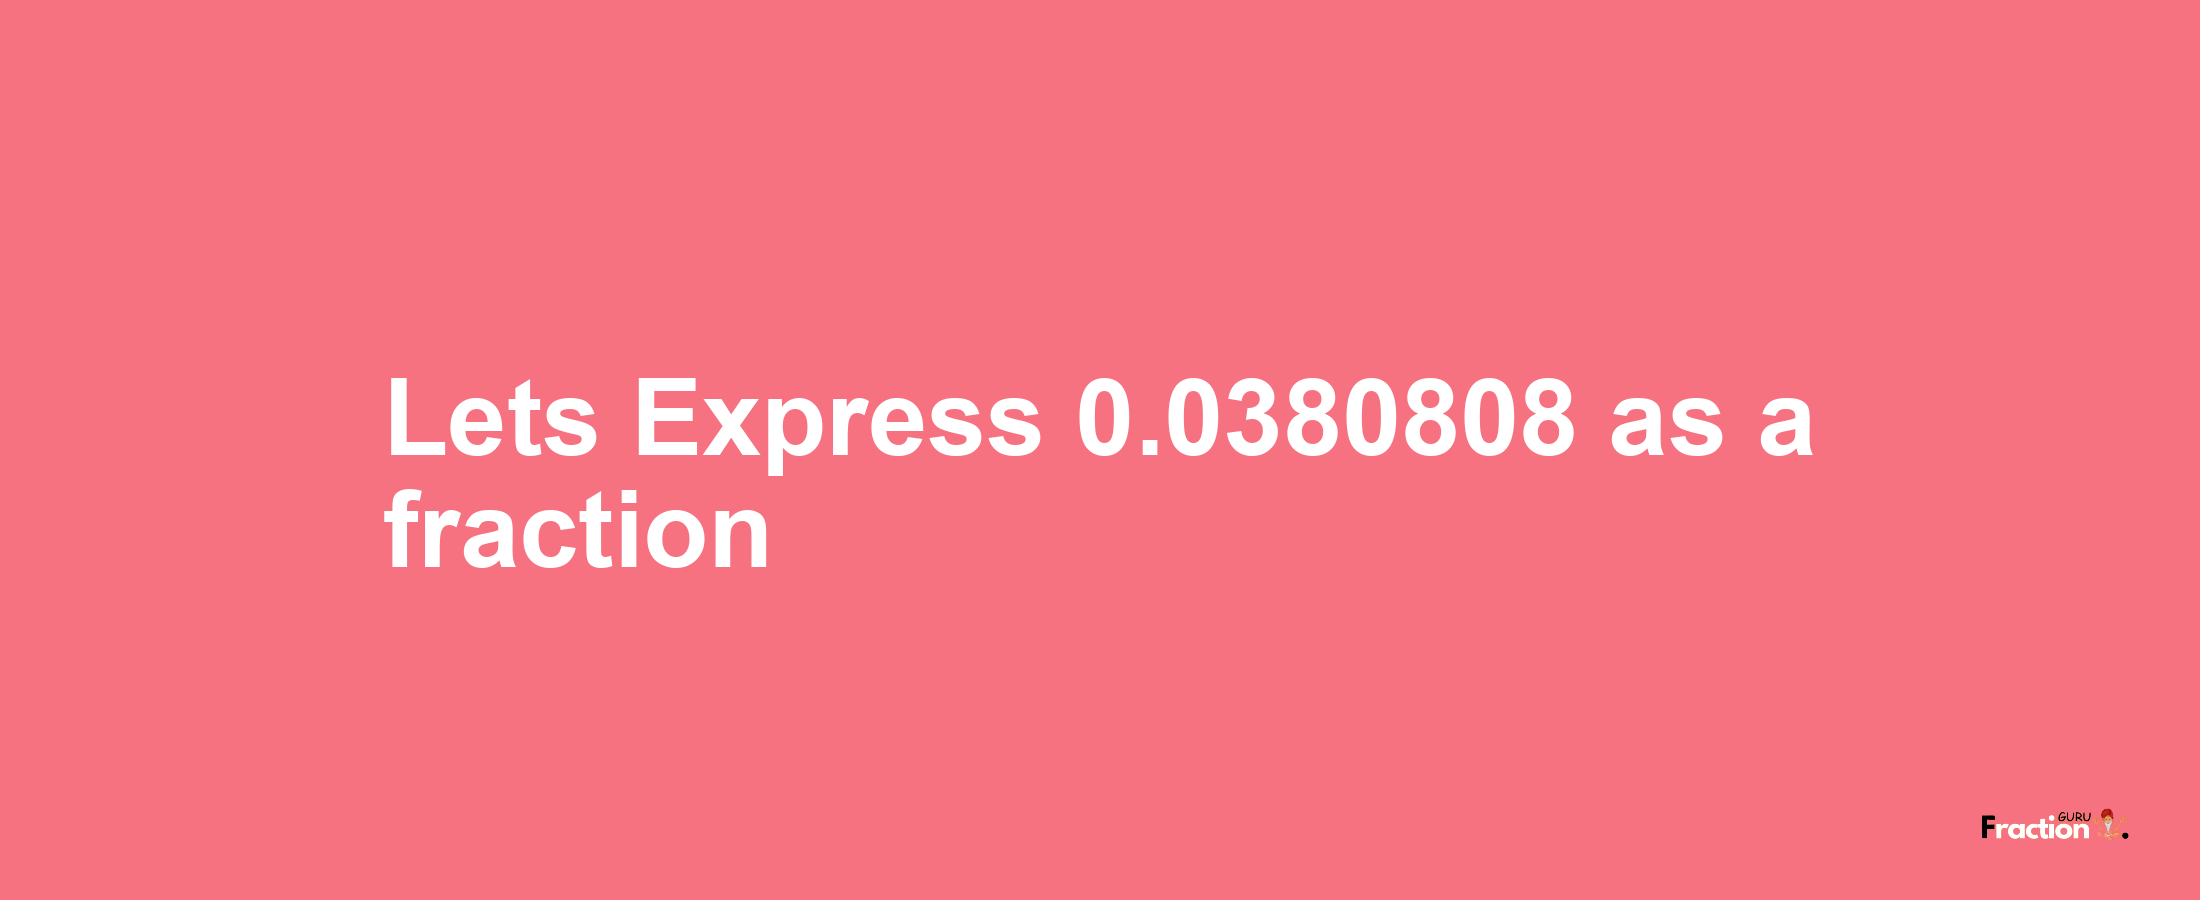 Lets Express 0.0380808 as afraction